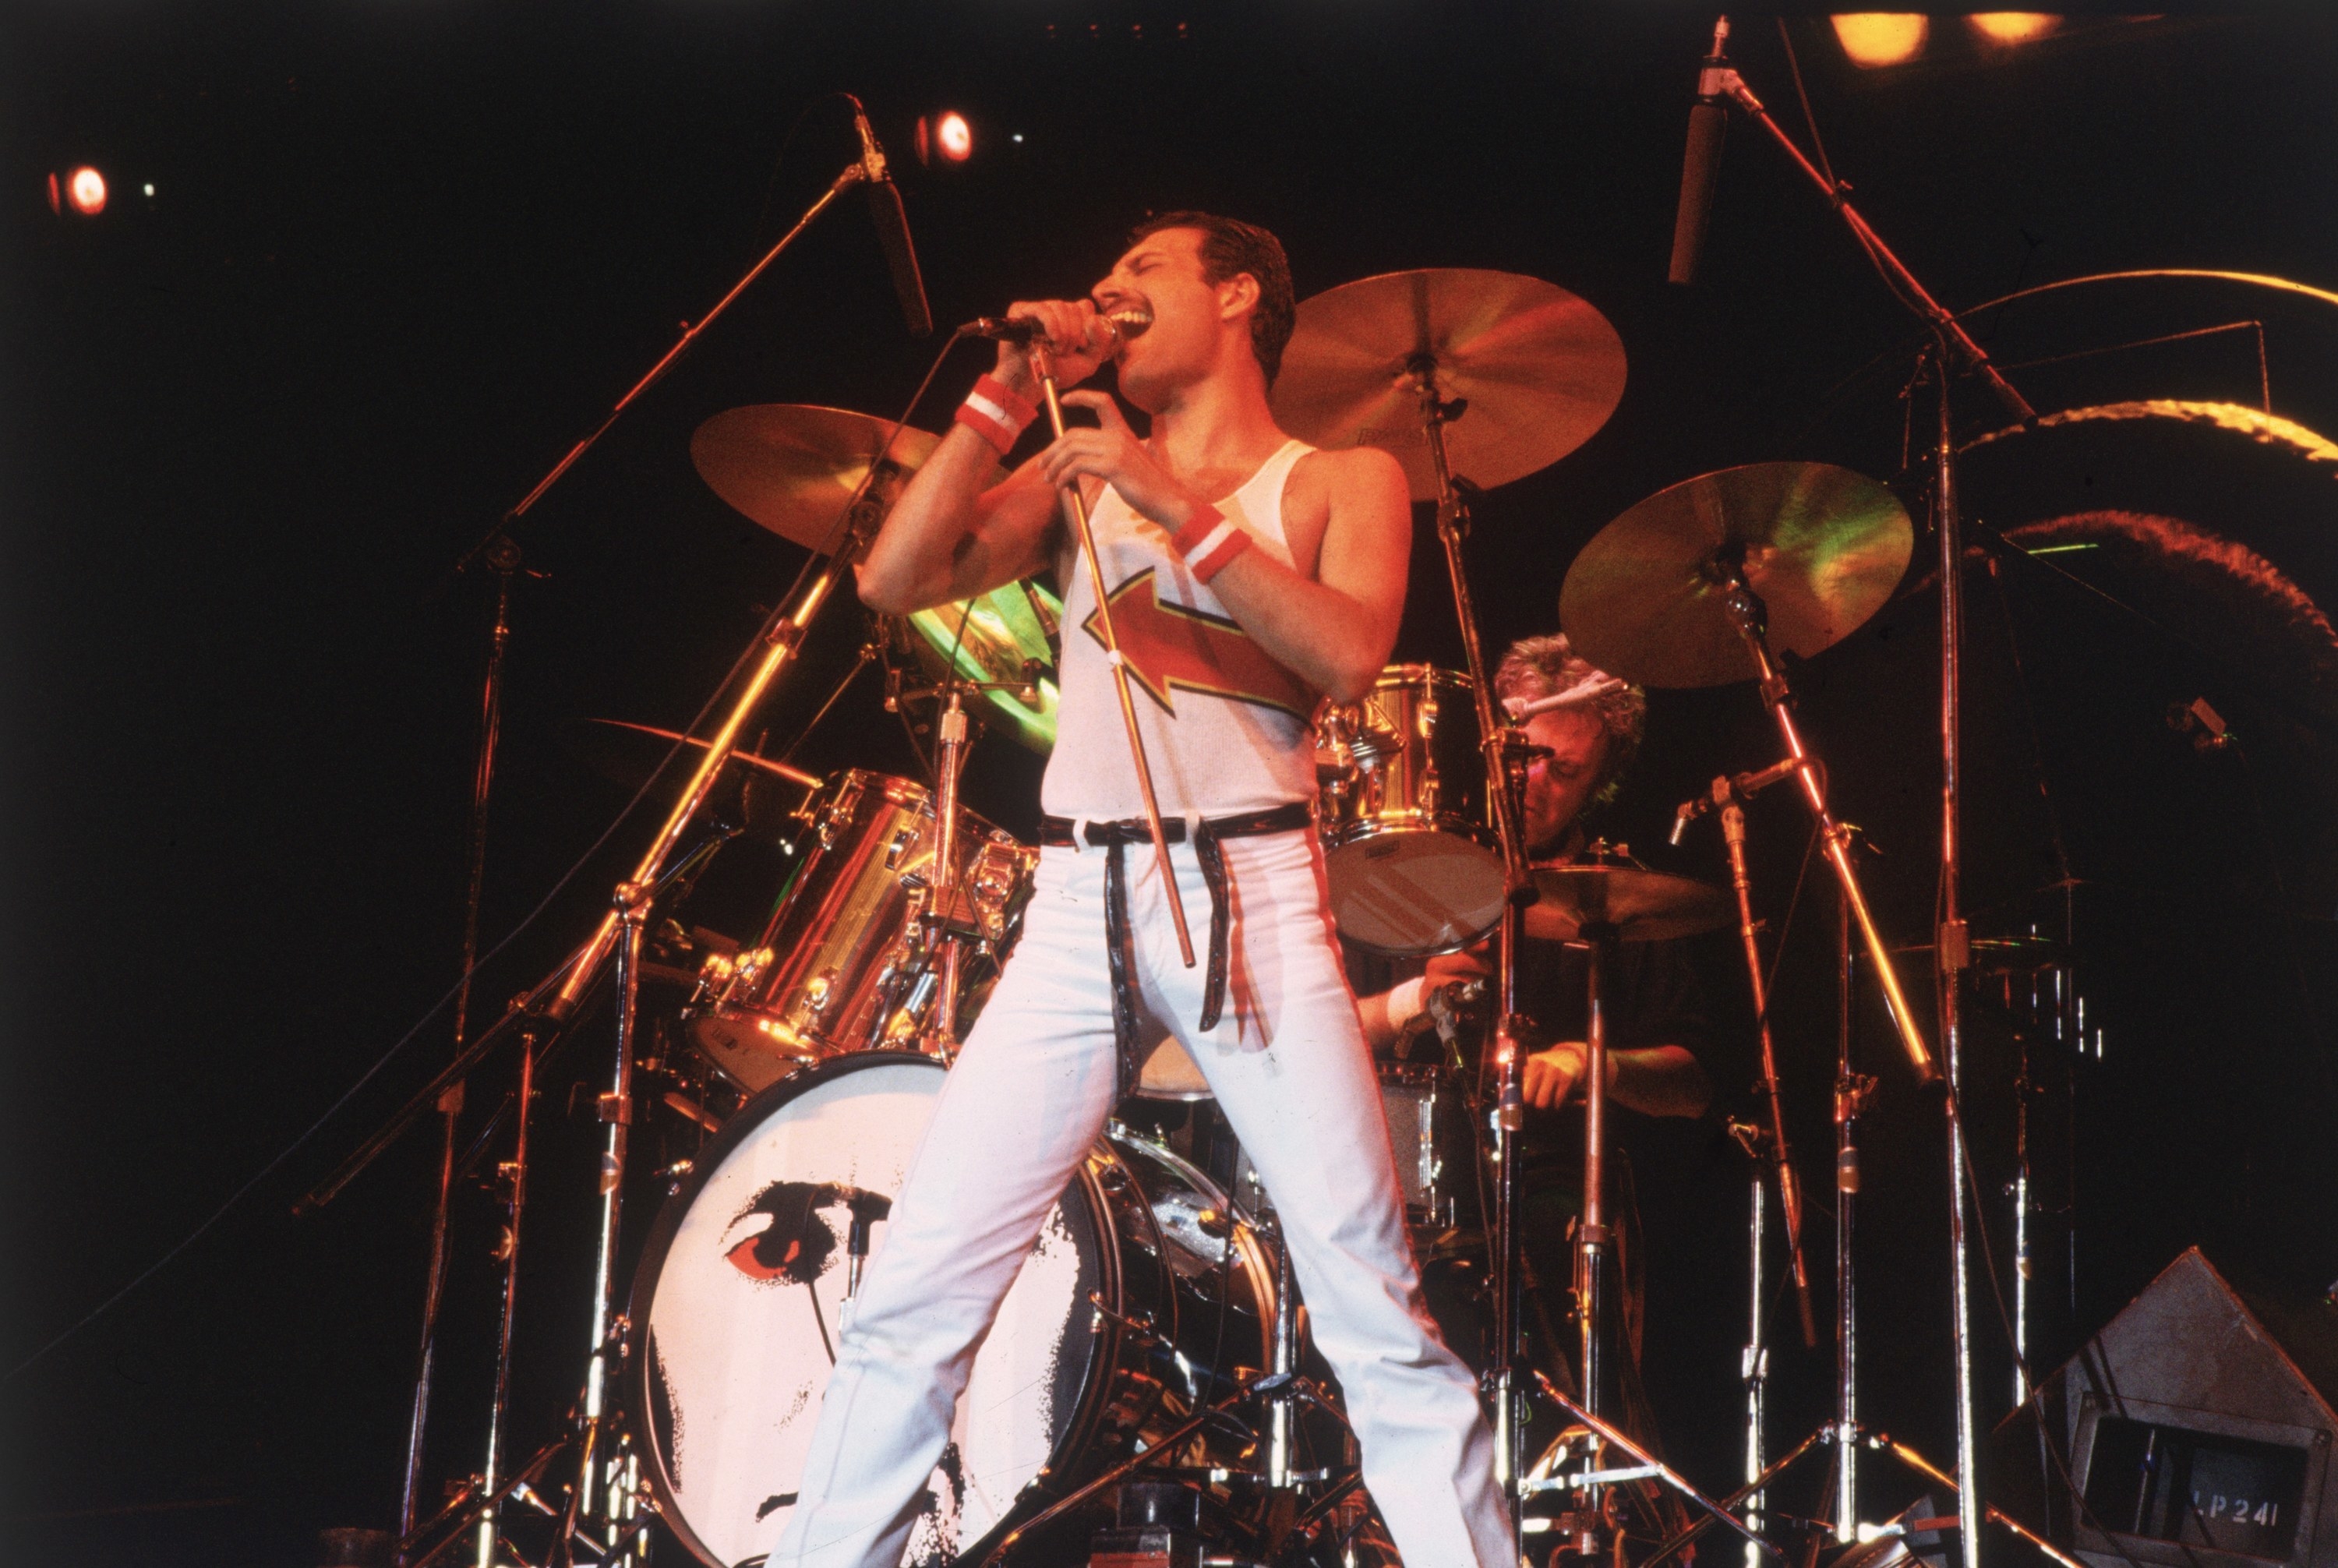 Freddie Mercury performing in an all white outfit, belting into a microphone